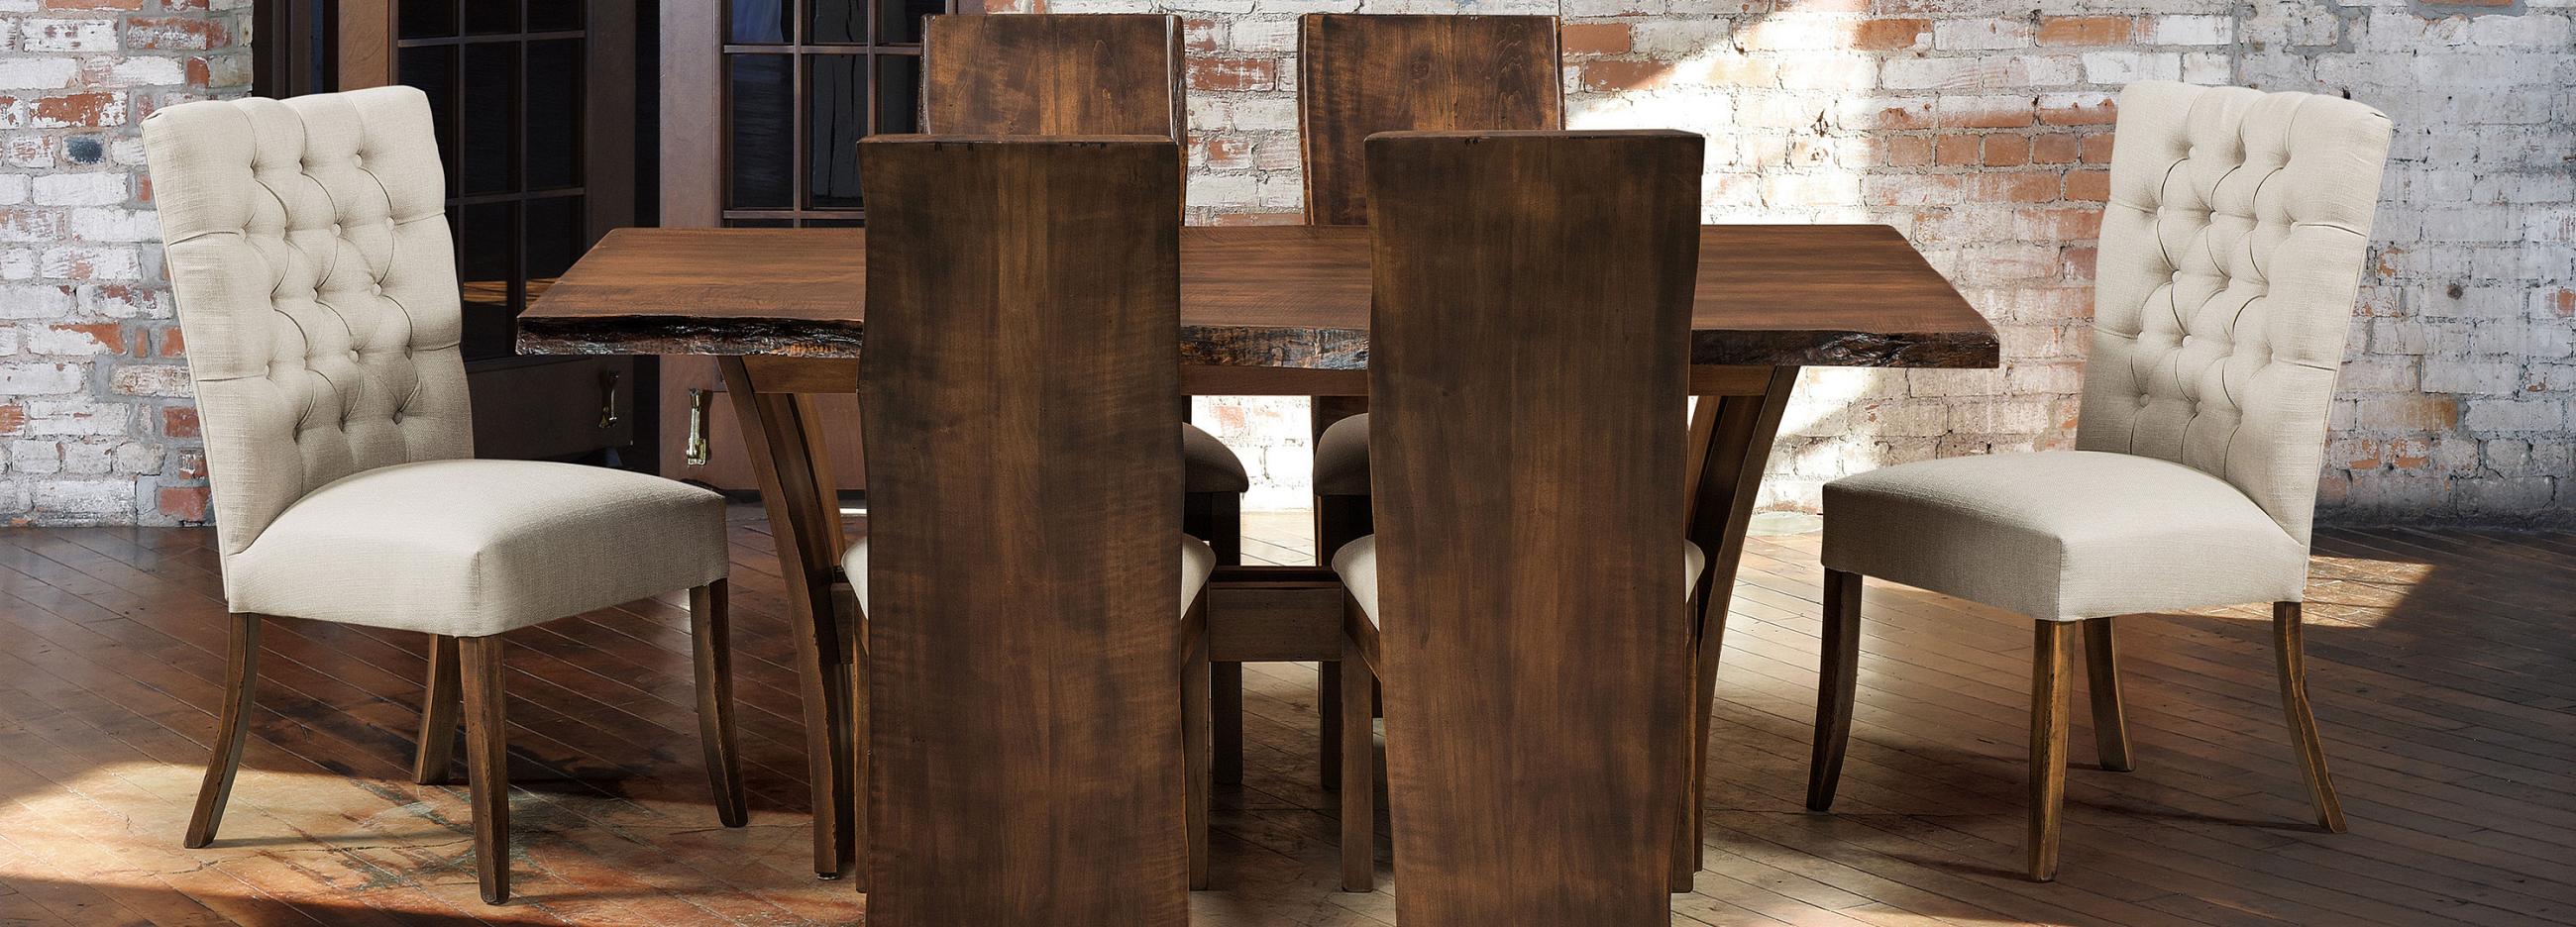 FN Chairs Dining Room Furniture